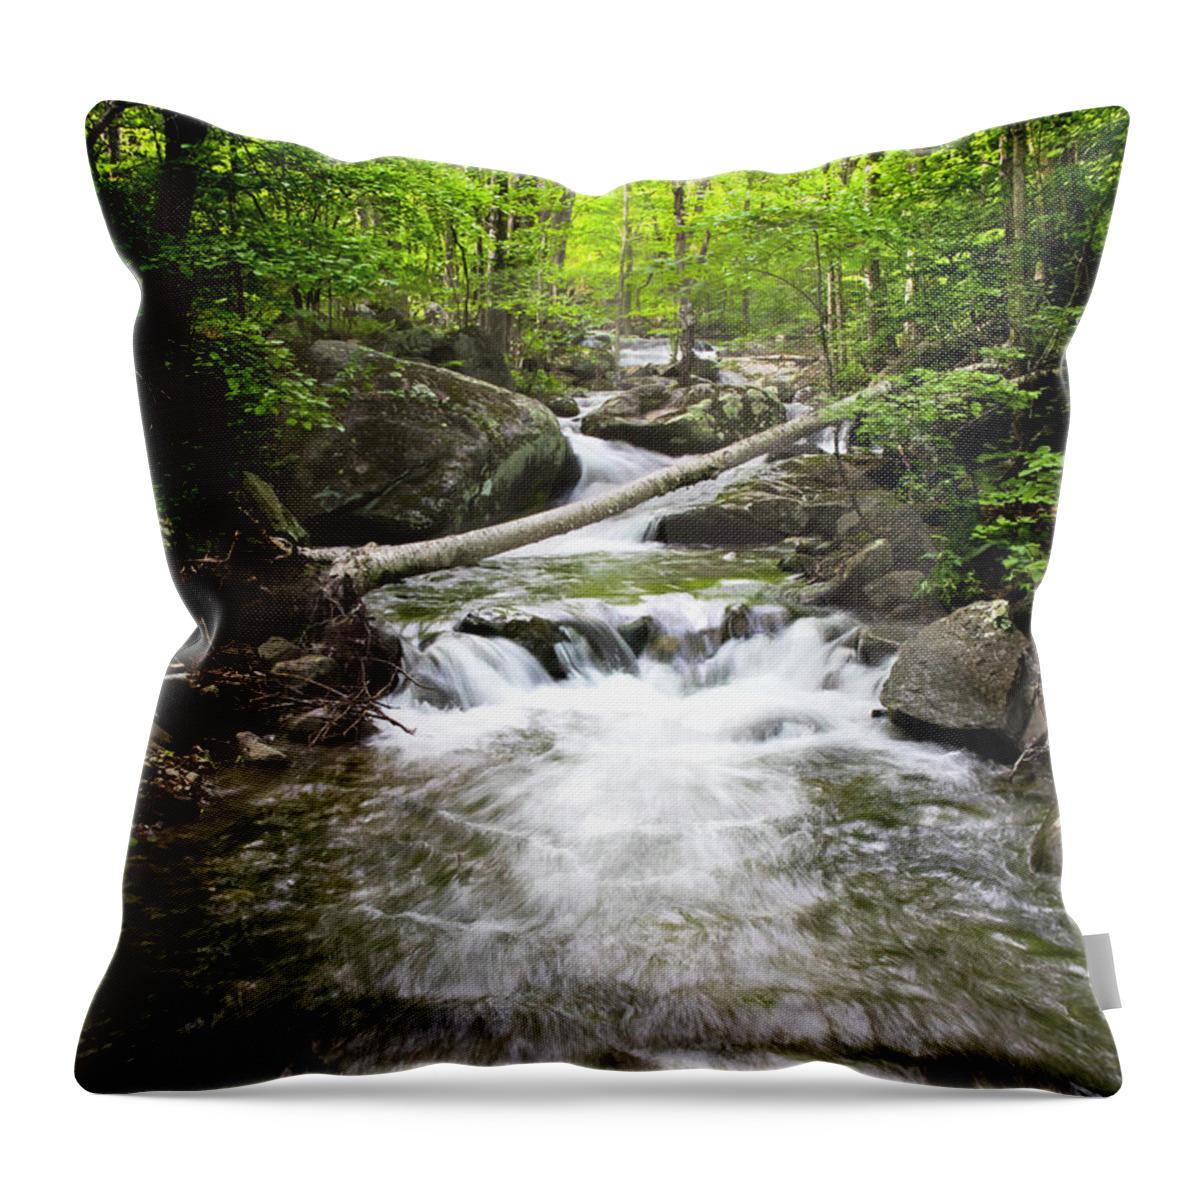 Blue Ridge Parkway Throw Pillow featuring the photograph Blue Ridge Parkway Lonely Mountain Stream by Norma Brandsberg